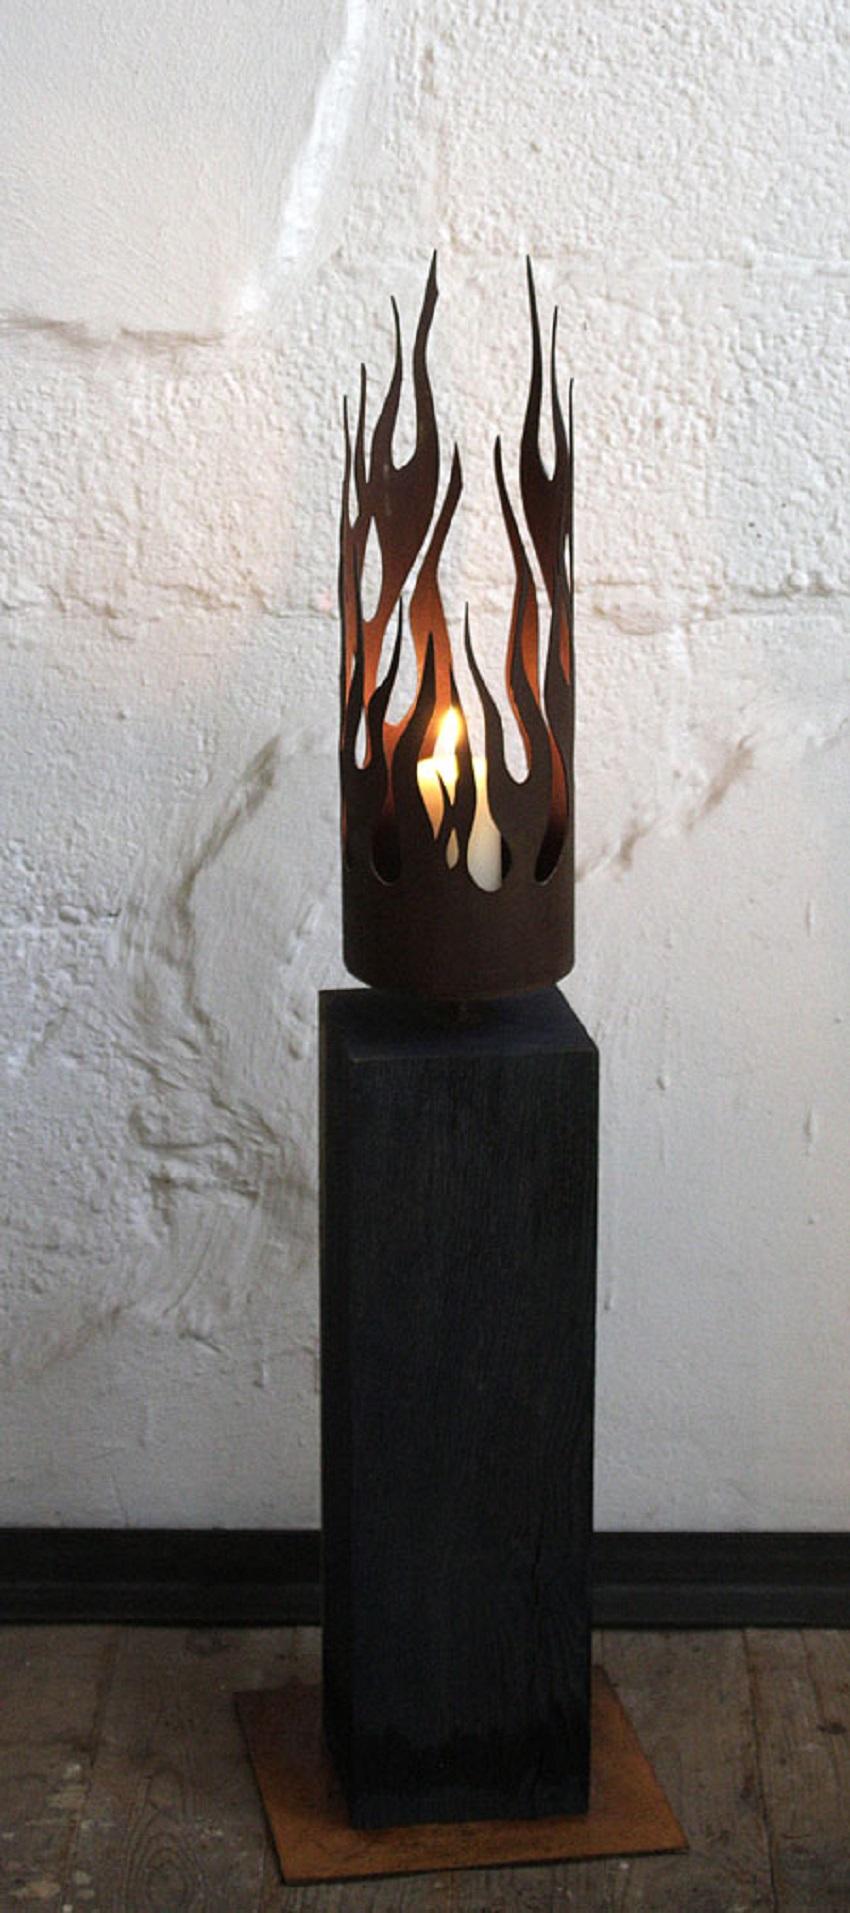 Unique Candle Holder - "Flames" on a oxidised oak pedestal - Medium Height - Mixed Media Art by Stefan Traloc